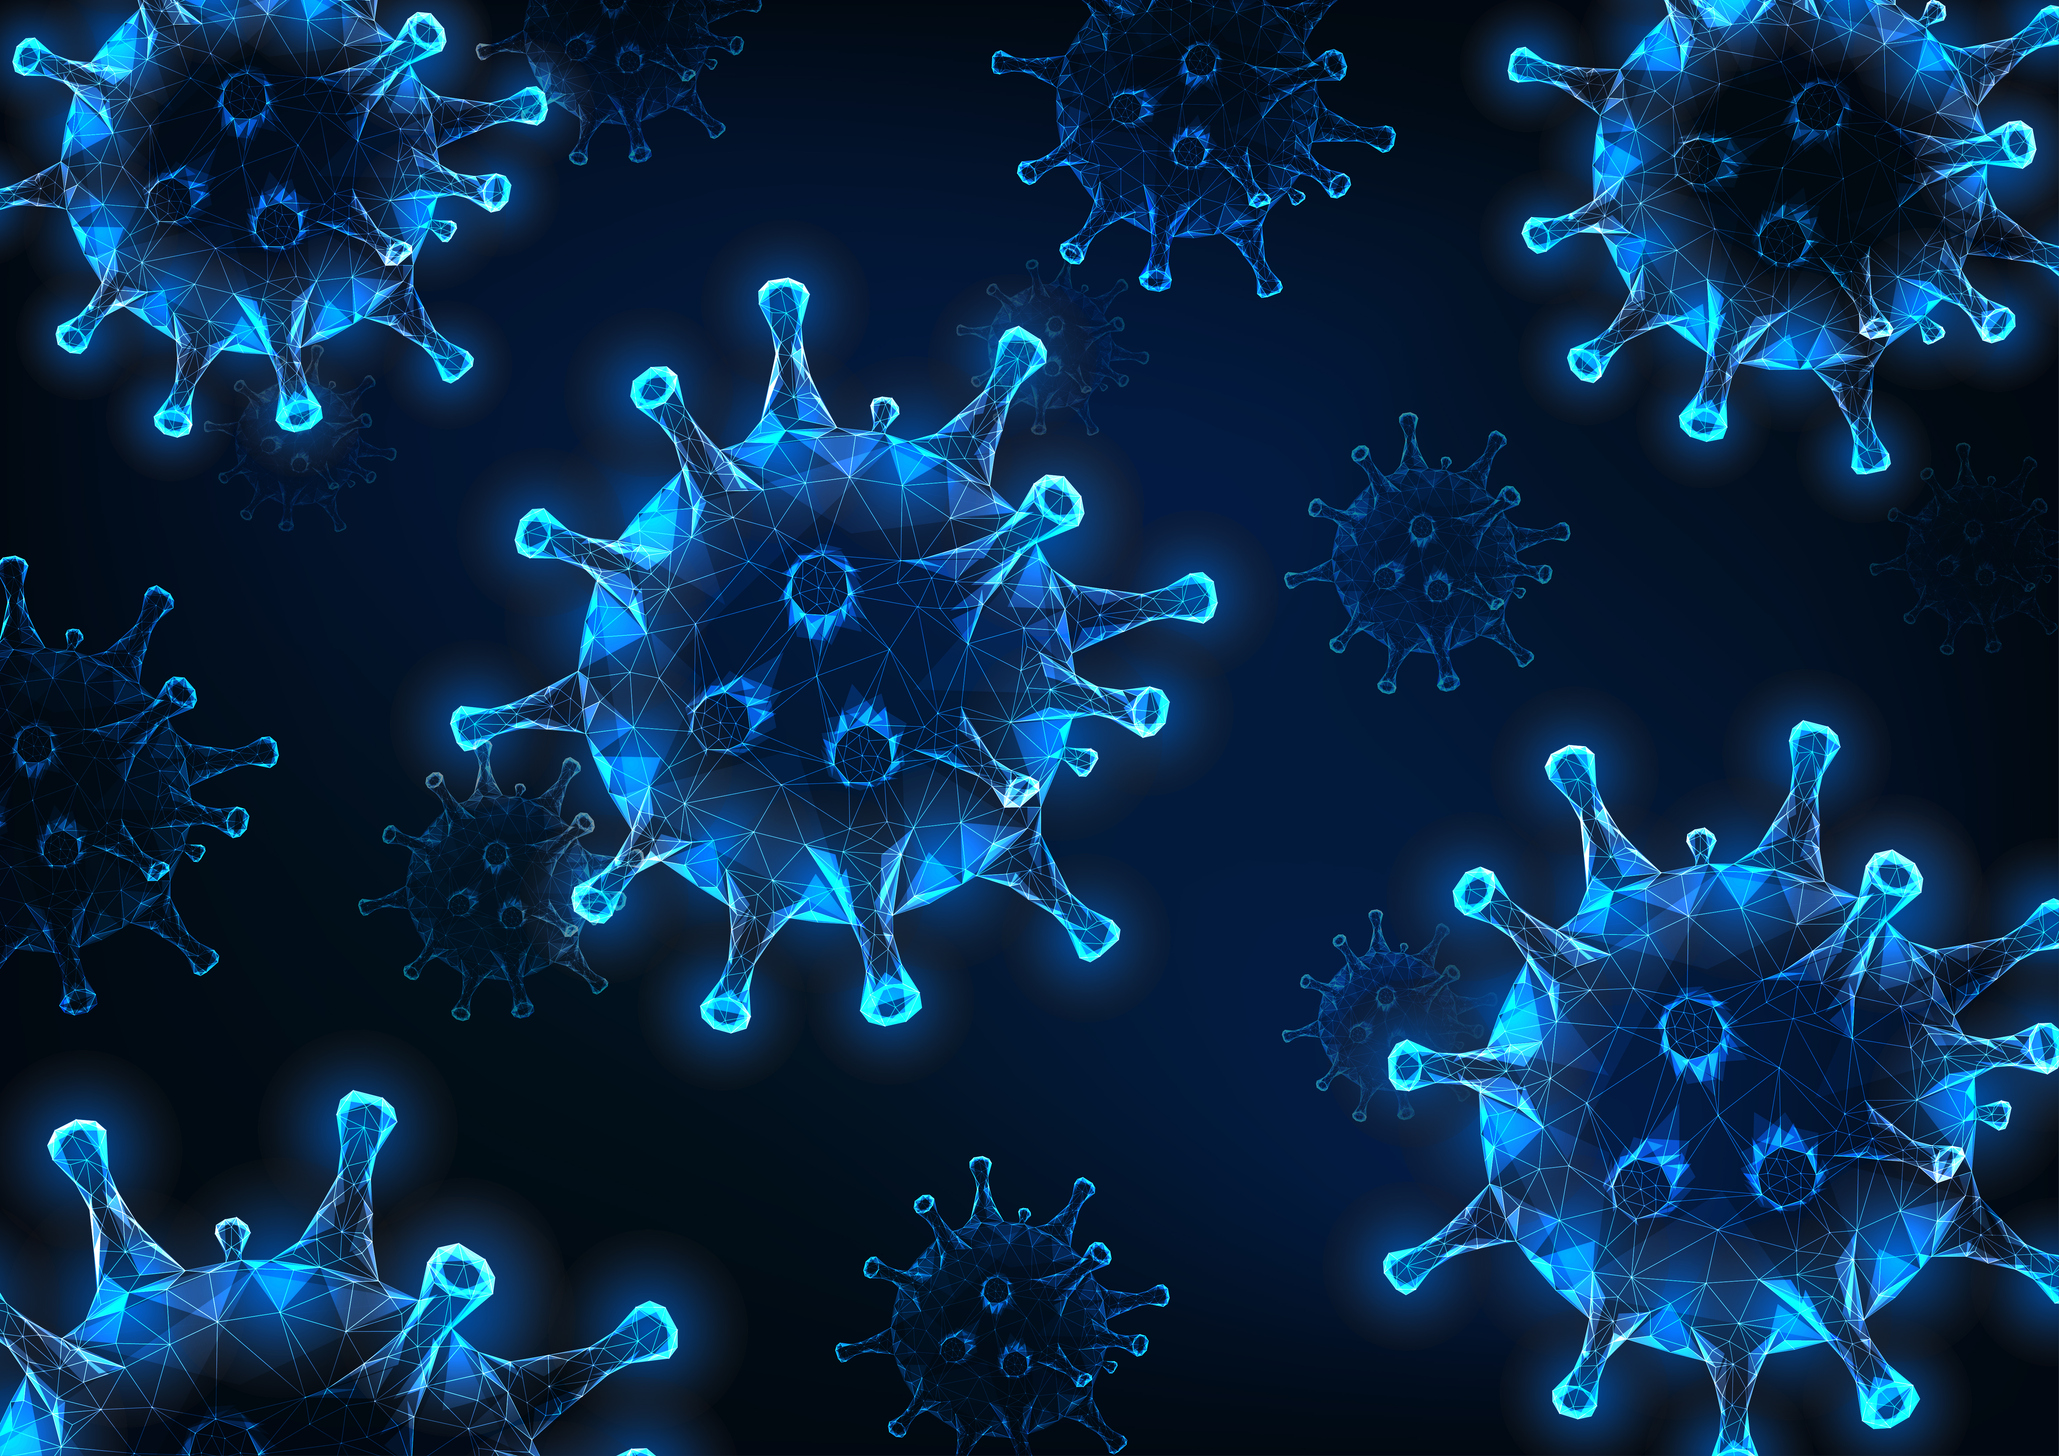 Virus cells in polygon style